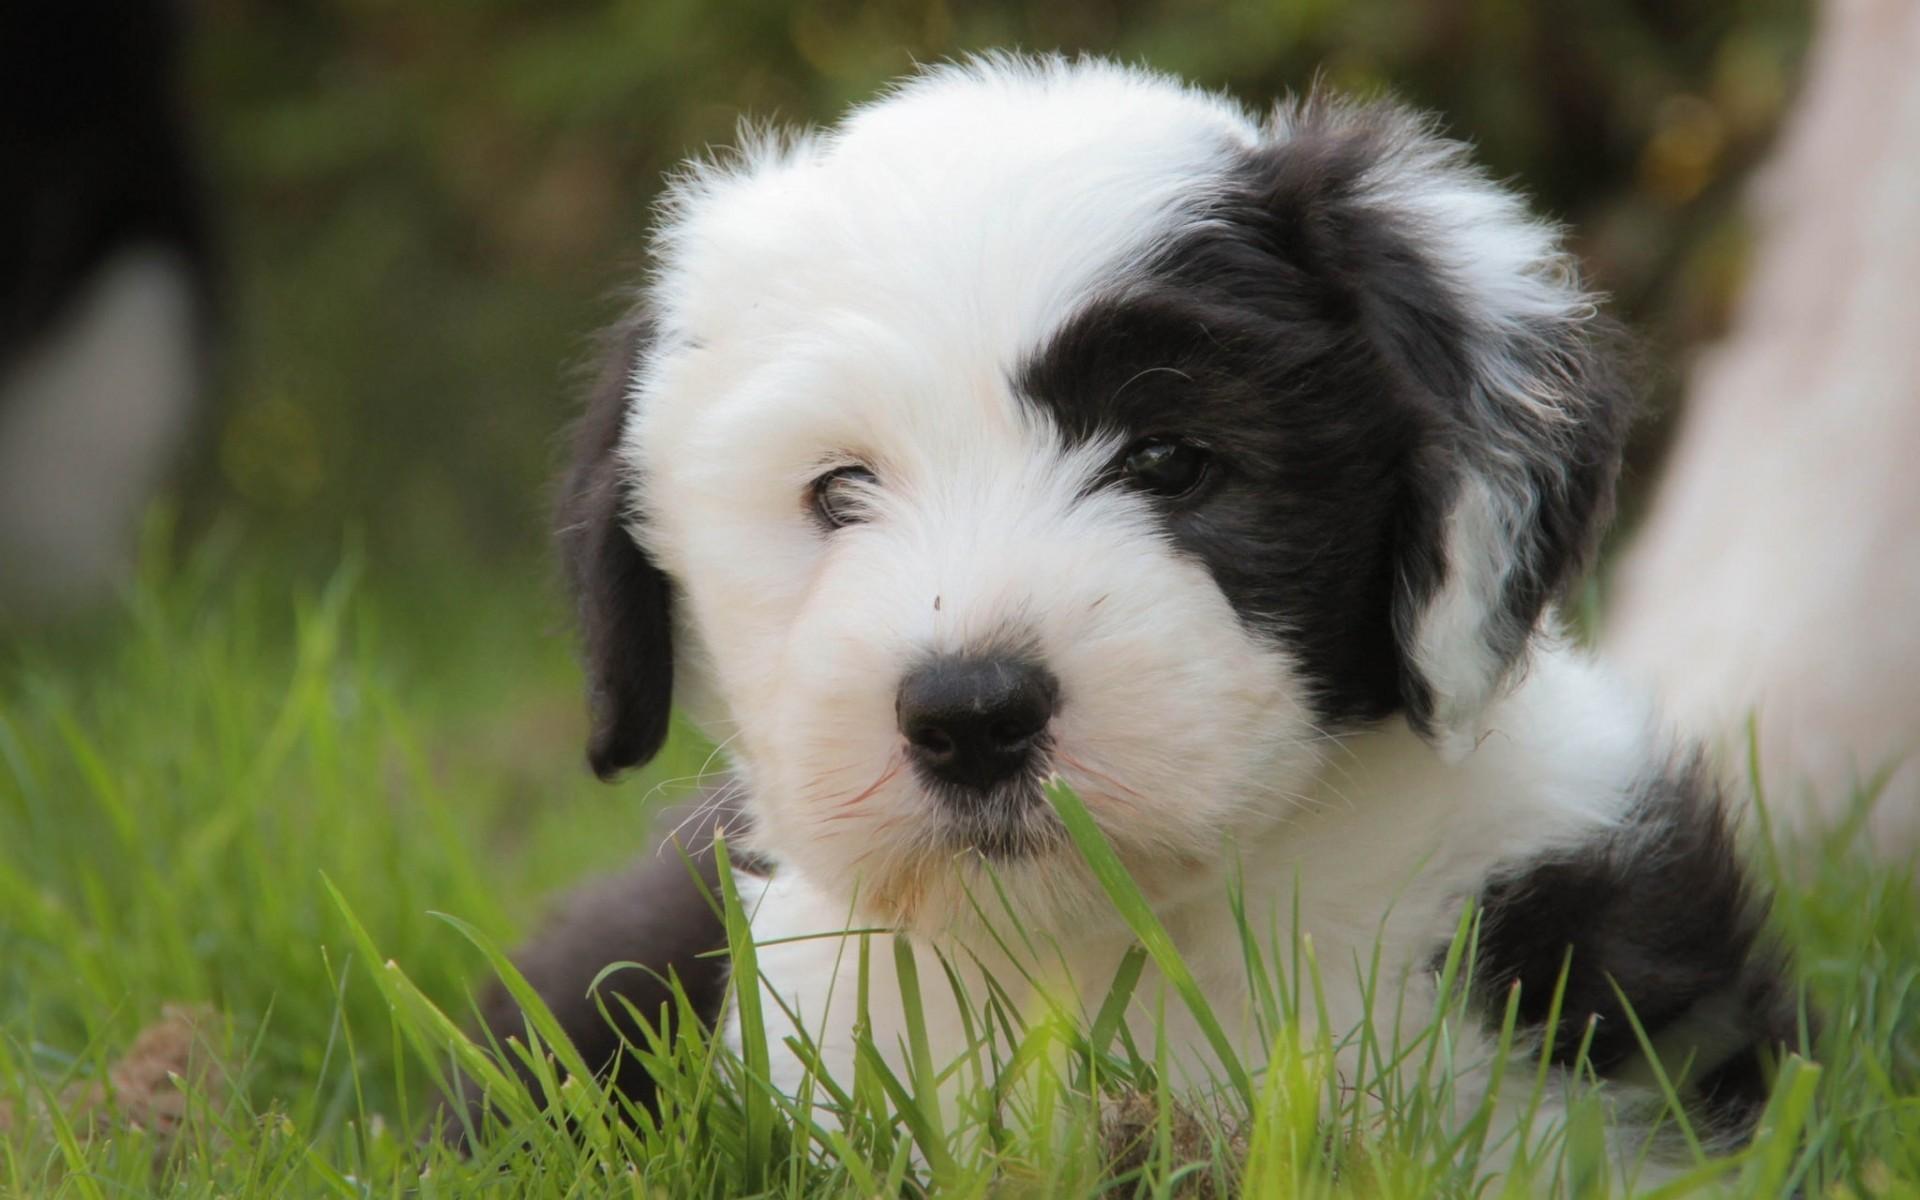 Download 1920x1200 Puppy, Black And White, Grass, Close Up